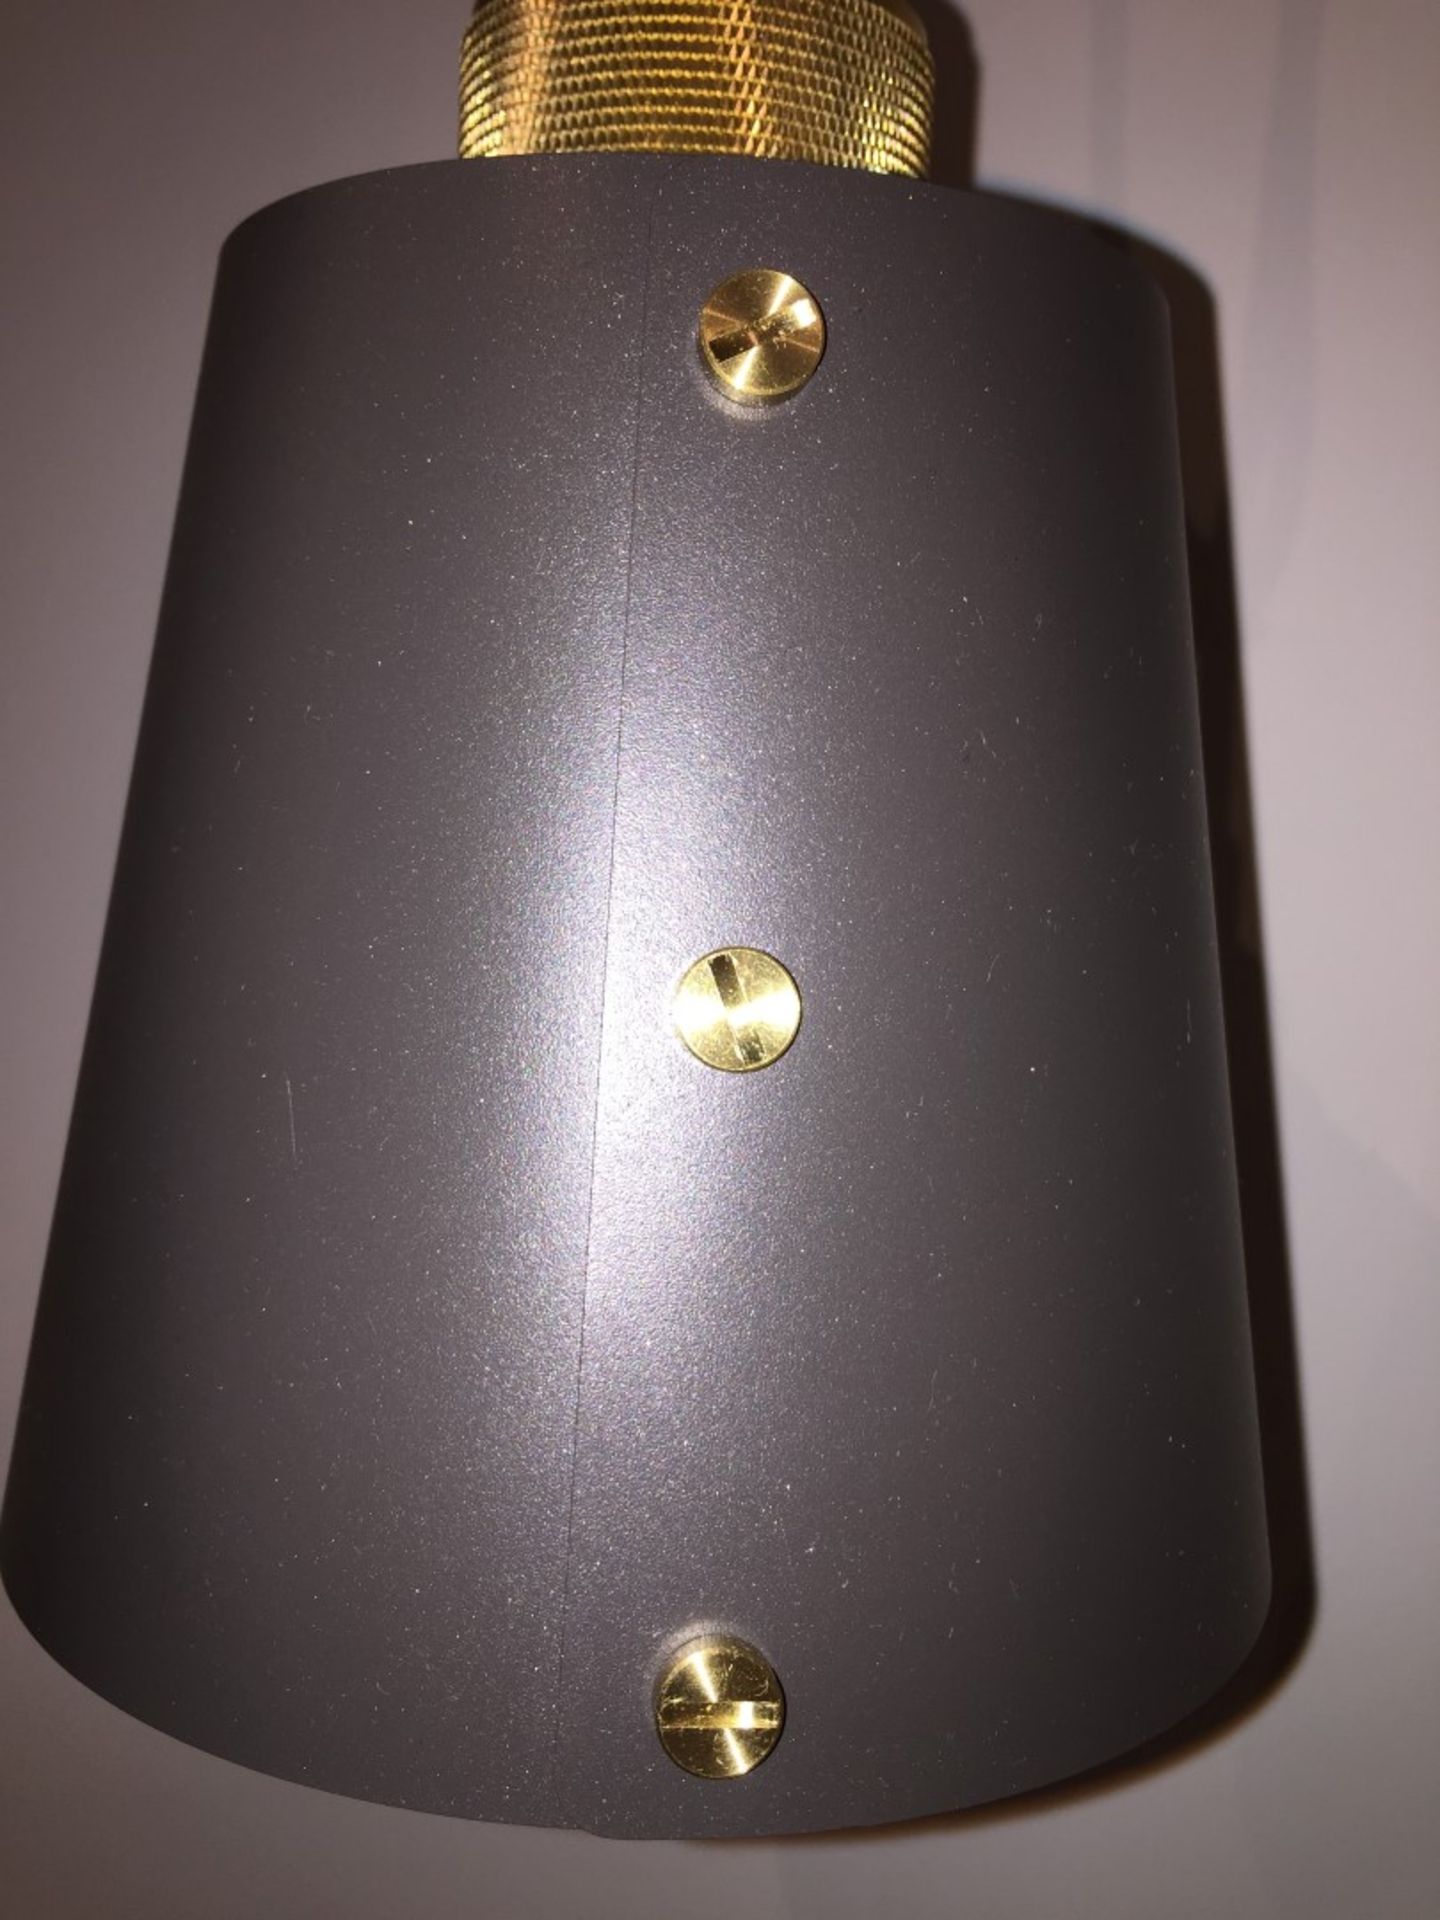 1 x BUSTER + PUNCH Hooked Wall Light With Metal Shade - Ref: WS/FF160G - CL204 - Location: London Ci - Image 8 of 10